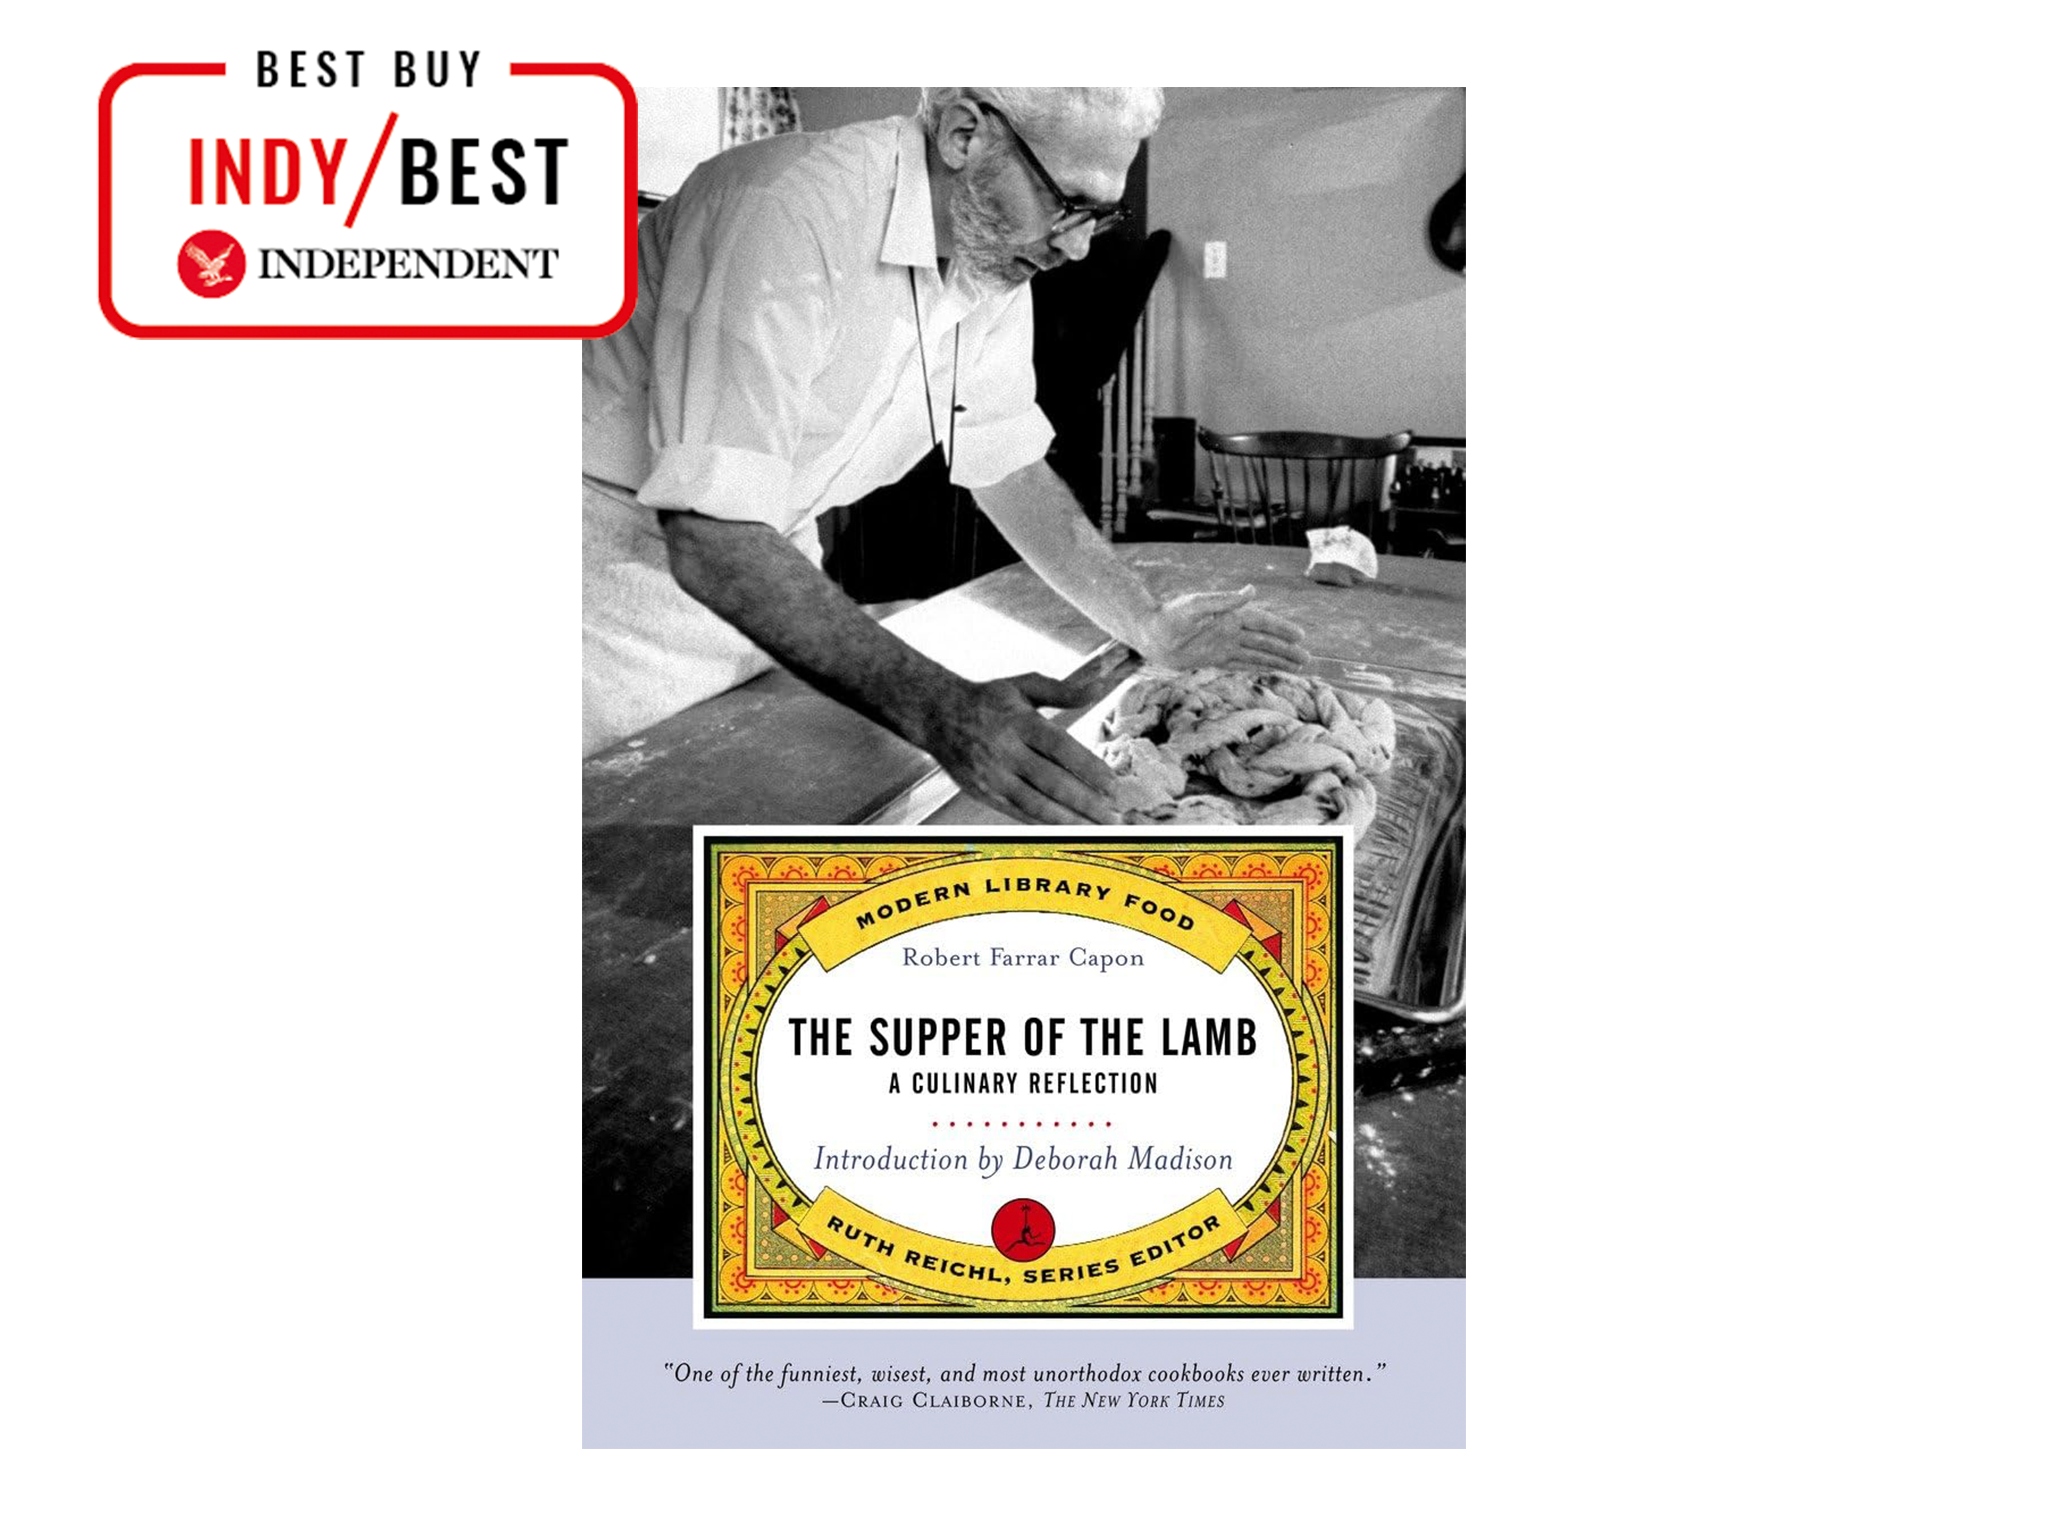 ‘The Supper of the Lamb, a culinary reflection’, by Robert Farrar Capon, published by Modern Library Food